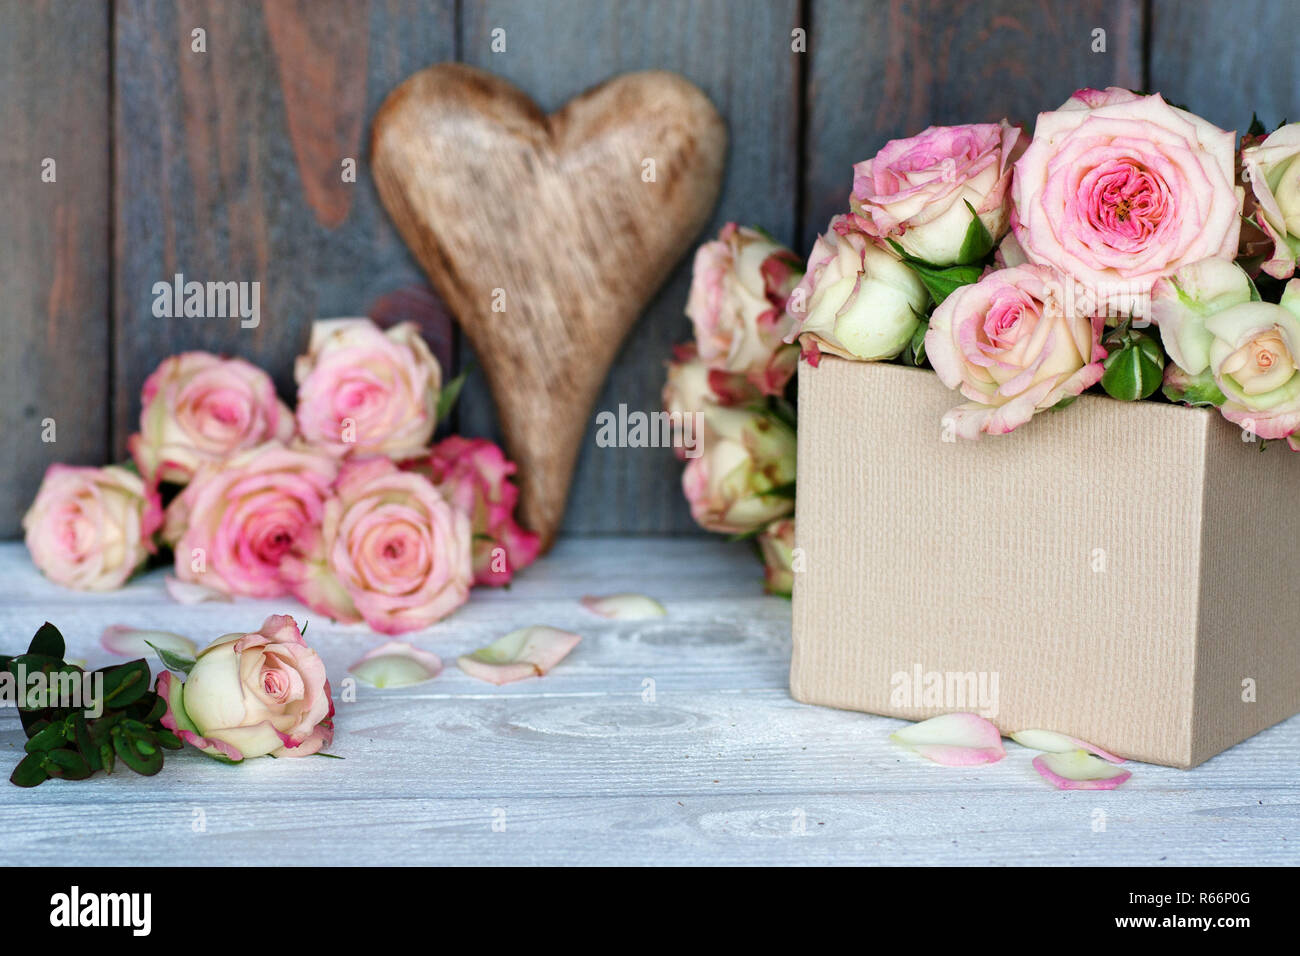 greetings with a heart for mothers day Stock Photo